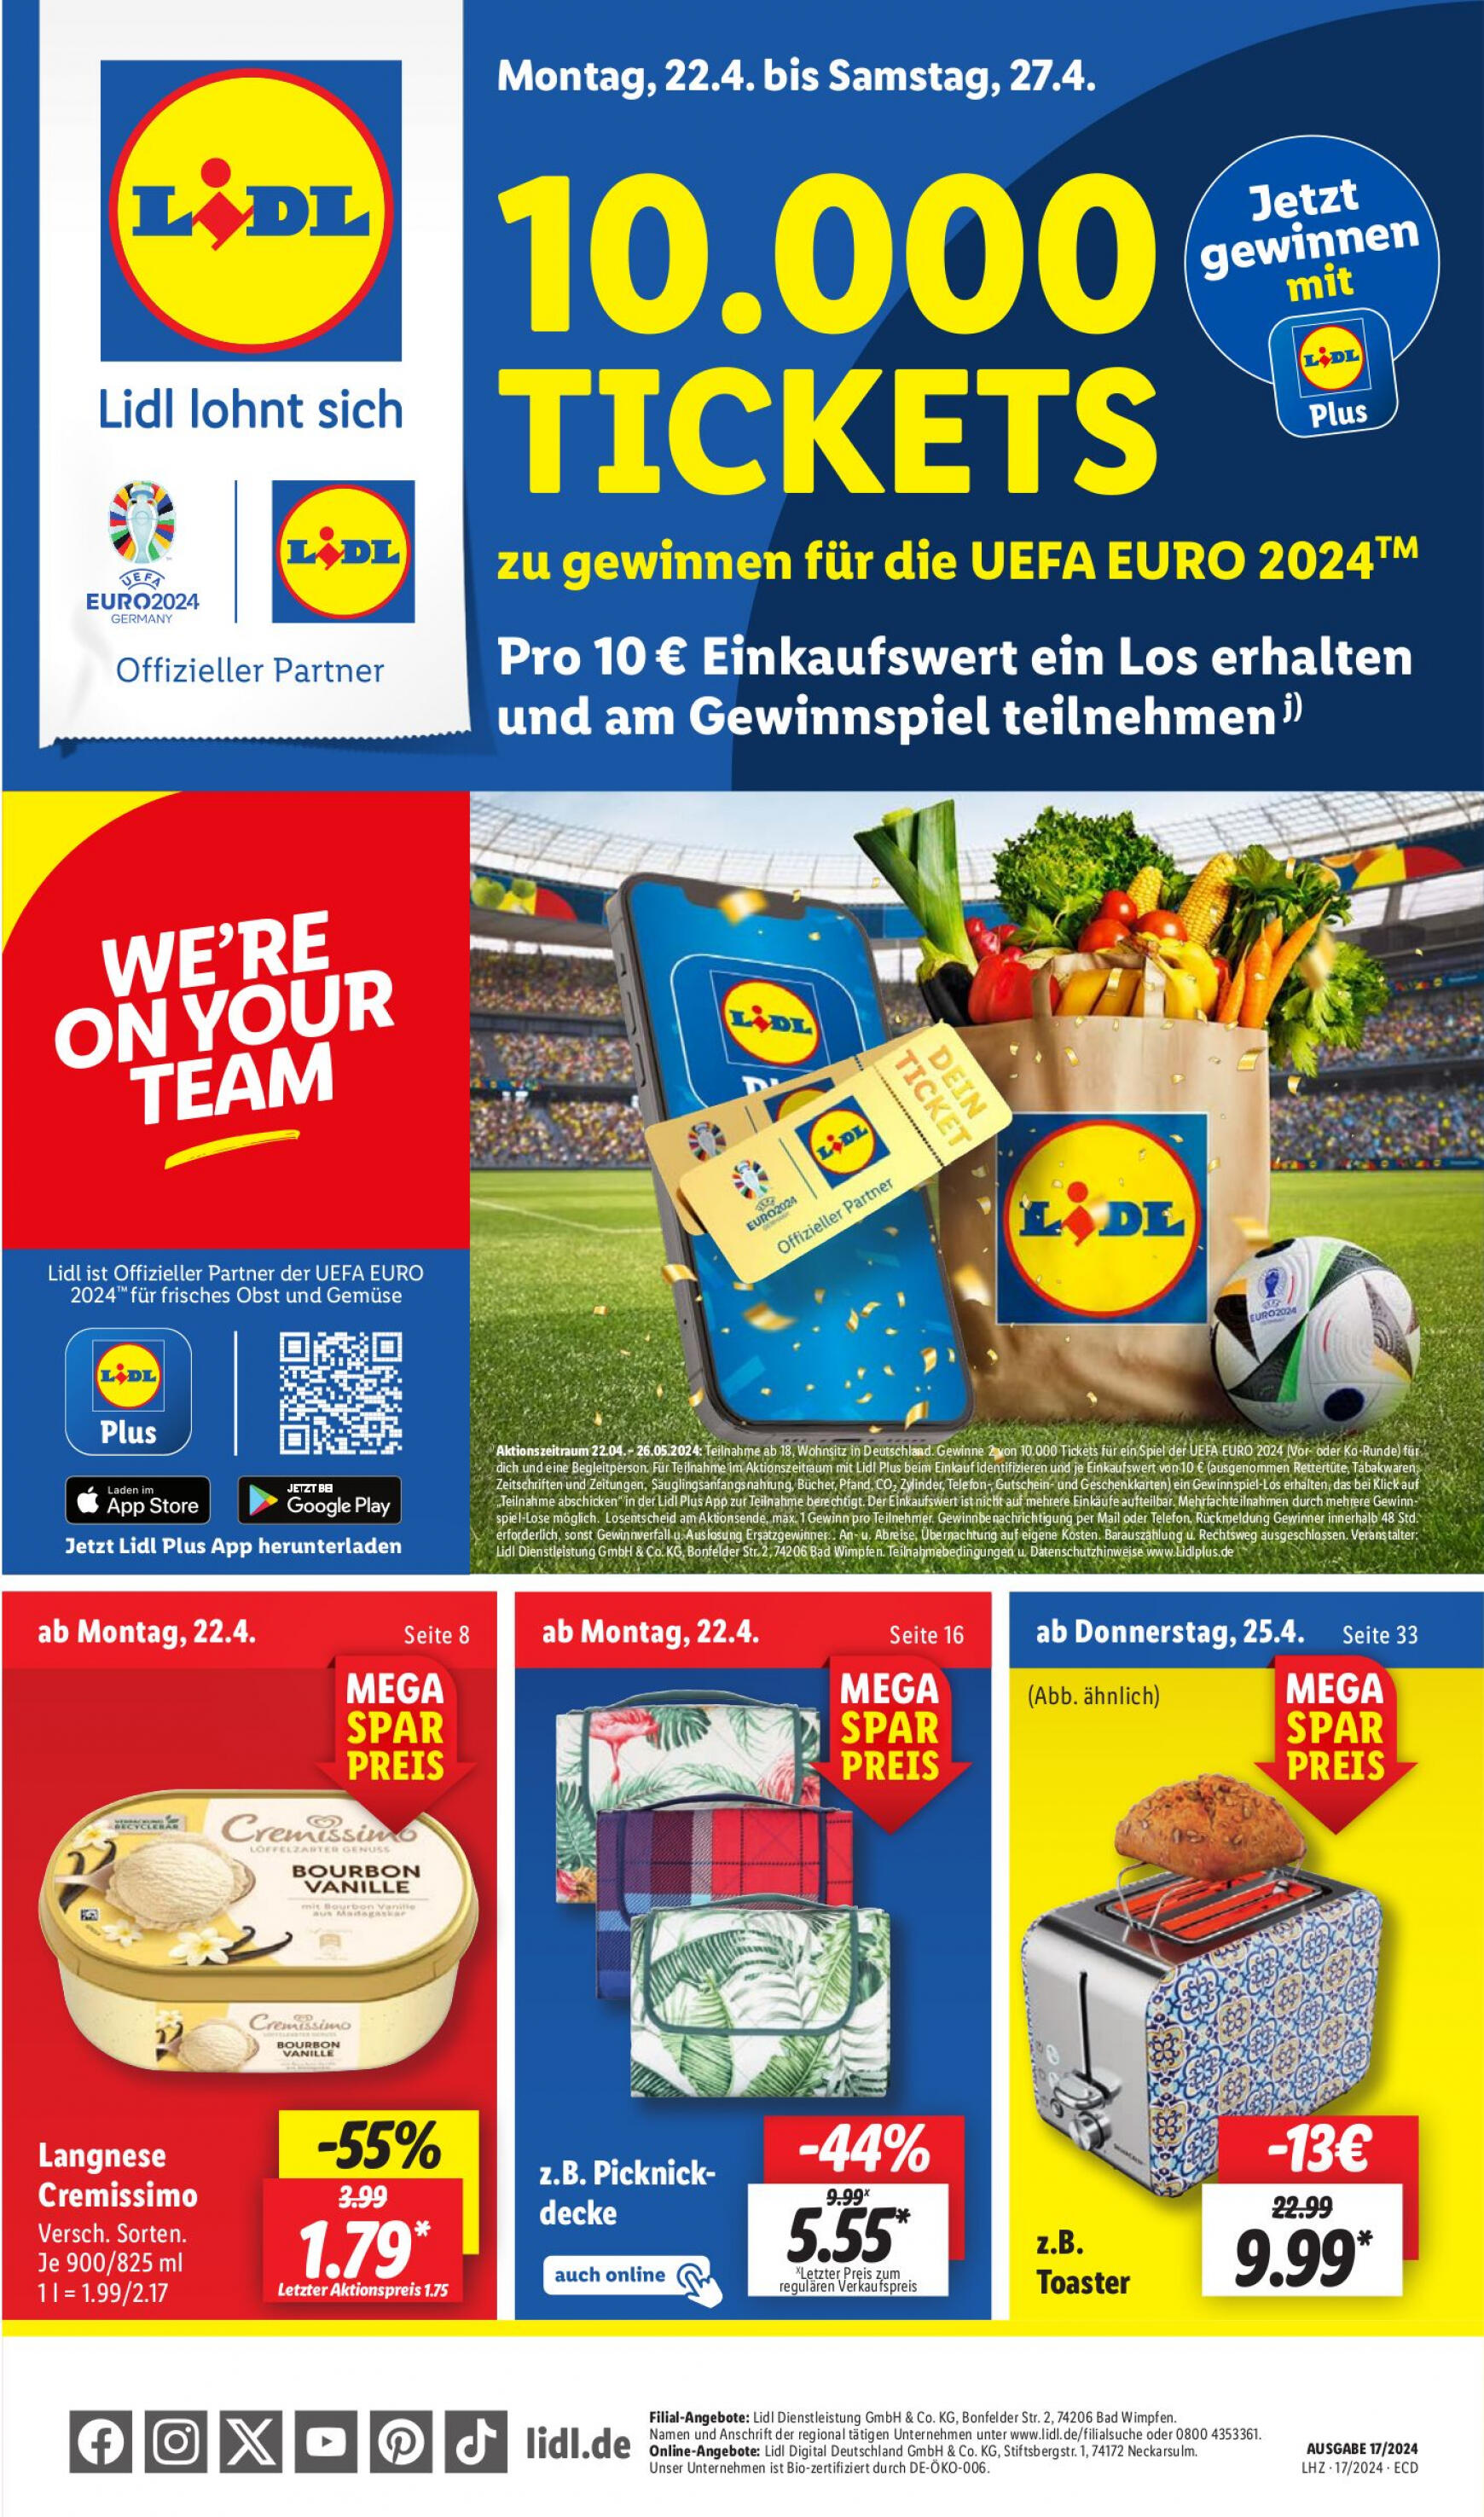 lidl - Flyer Lidl aktuell 22.04. - 27.04. - page: 1